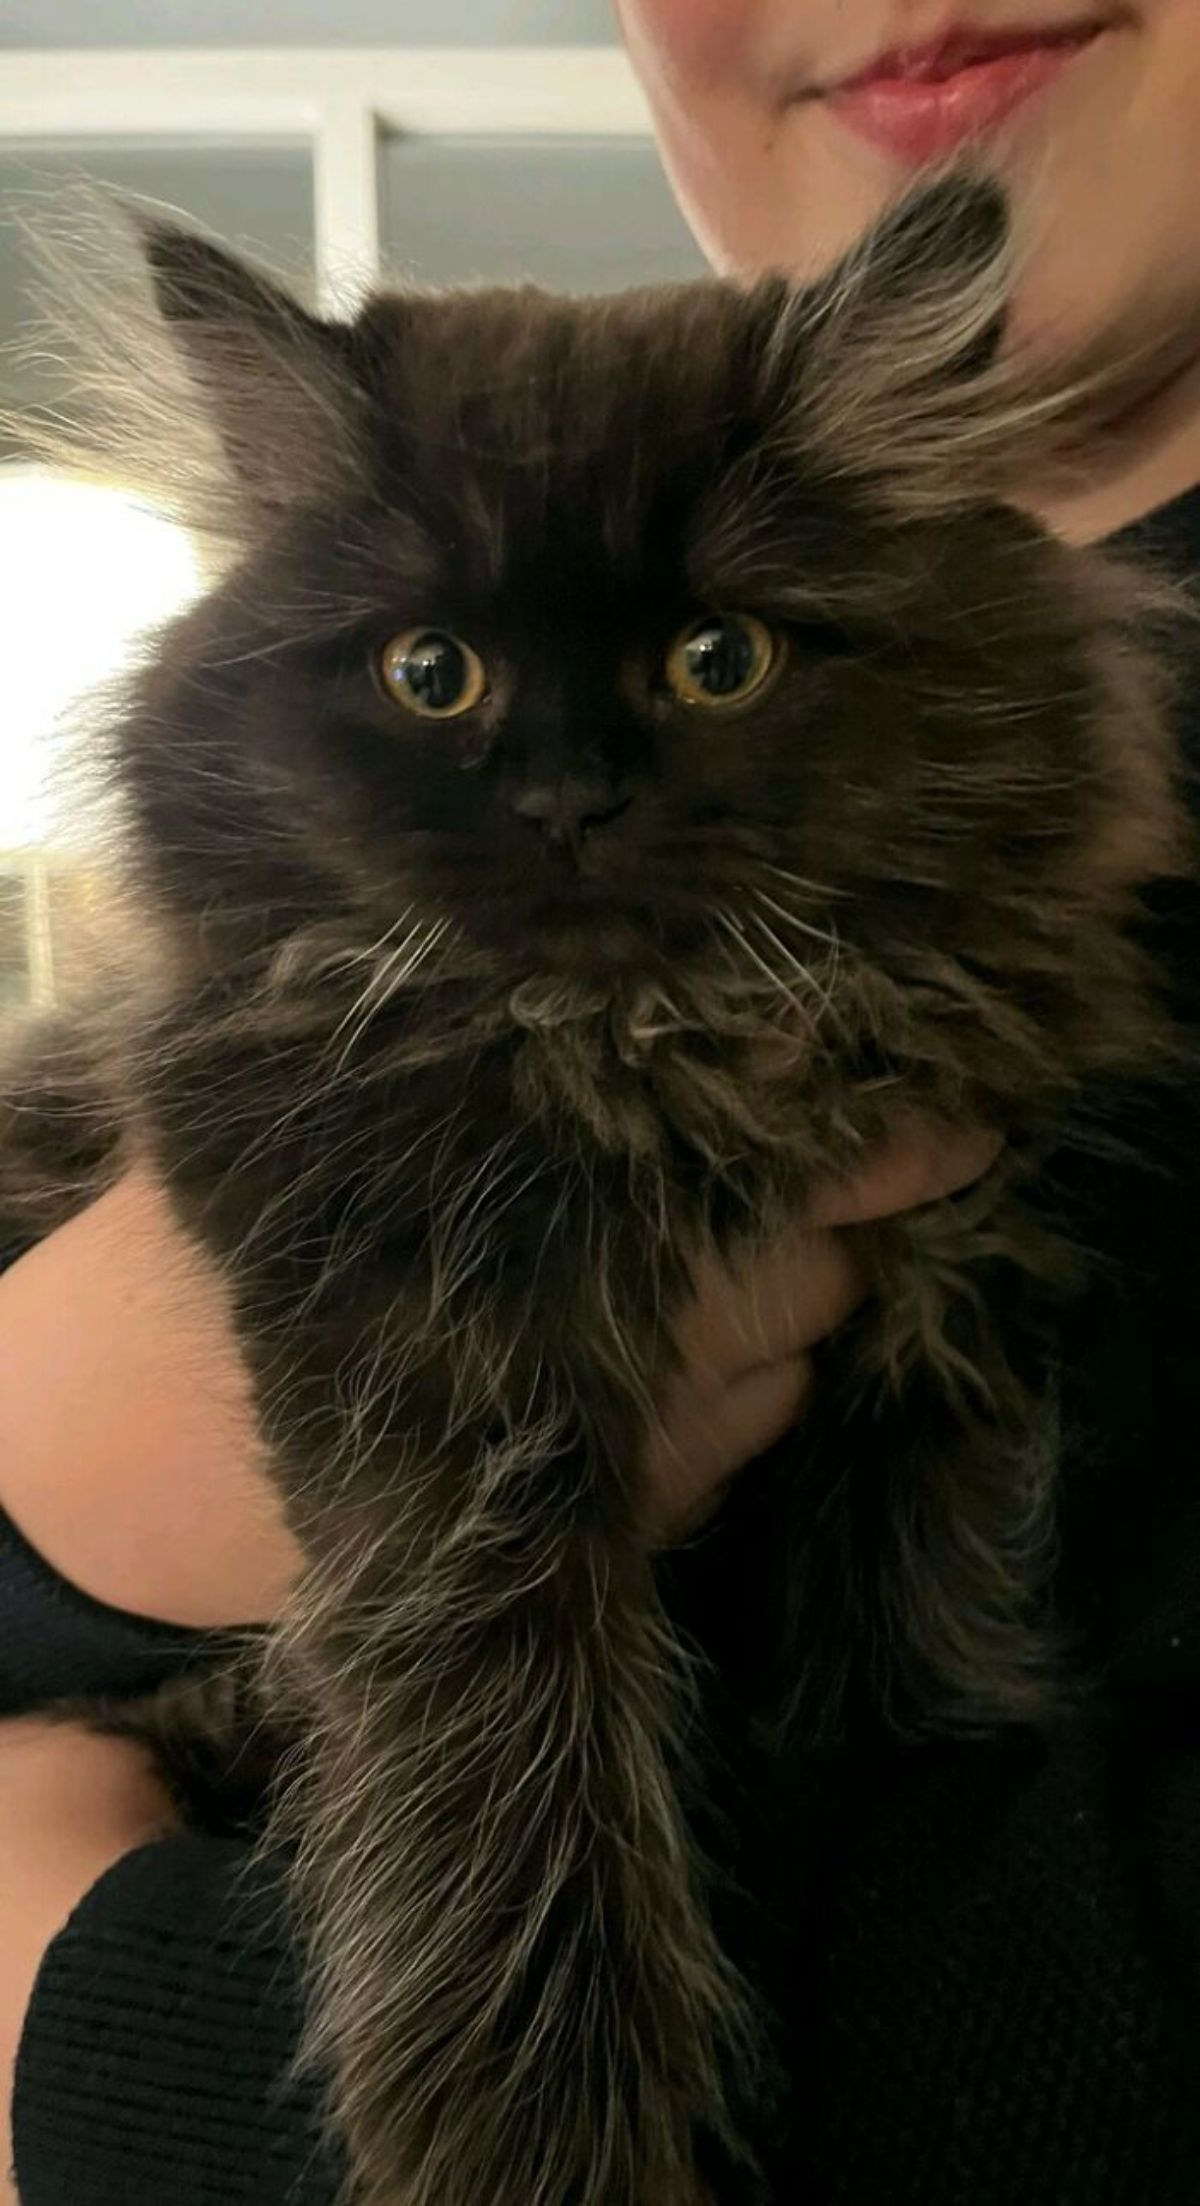 fluffy black cat being held by someone